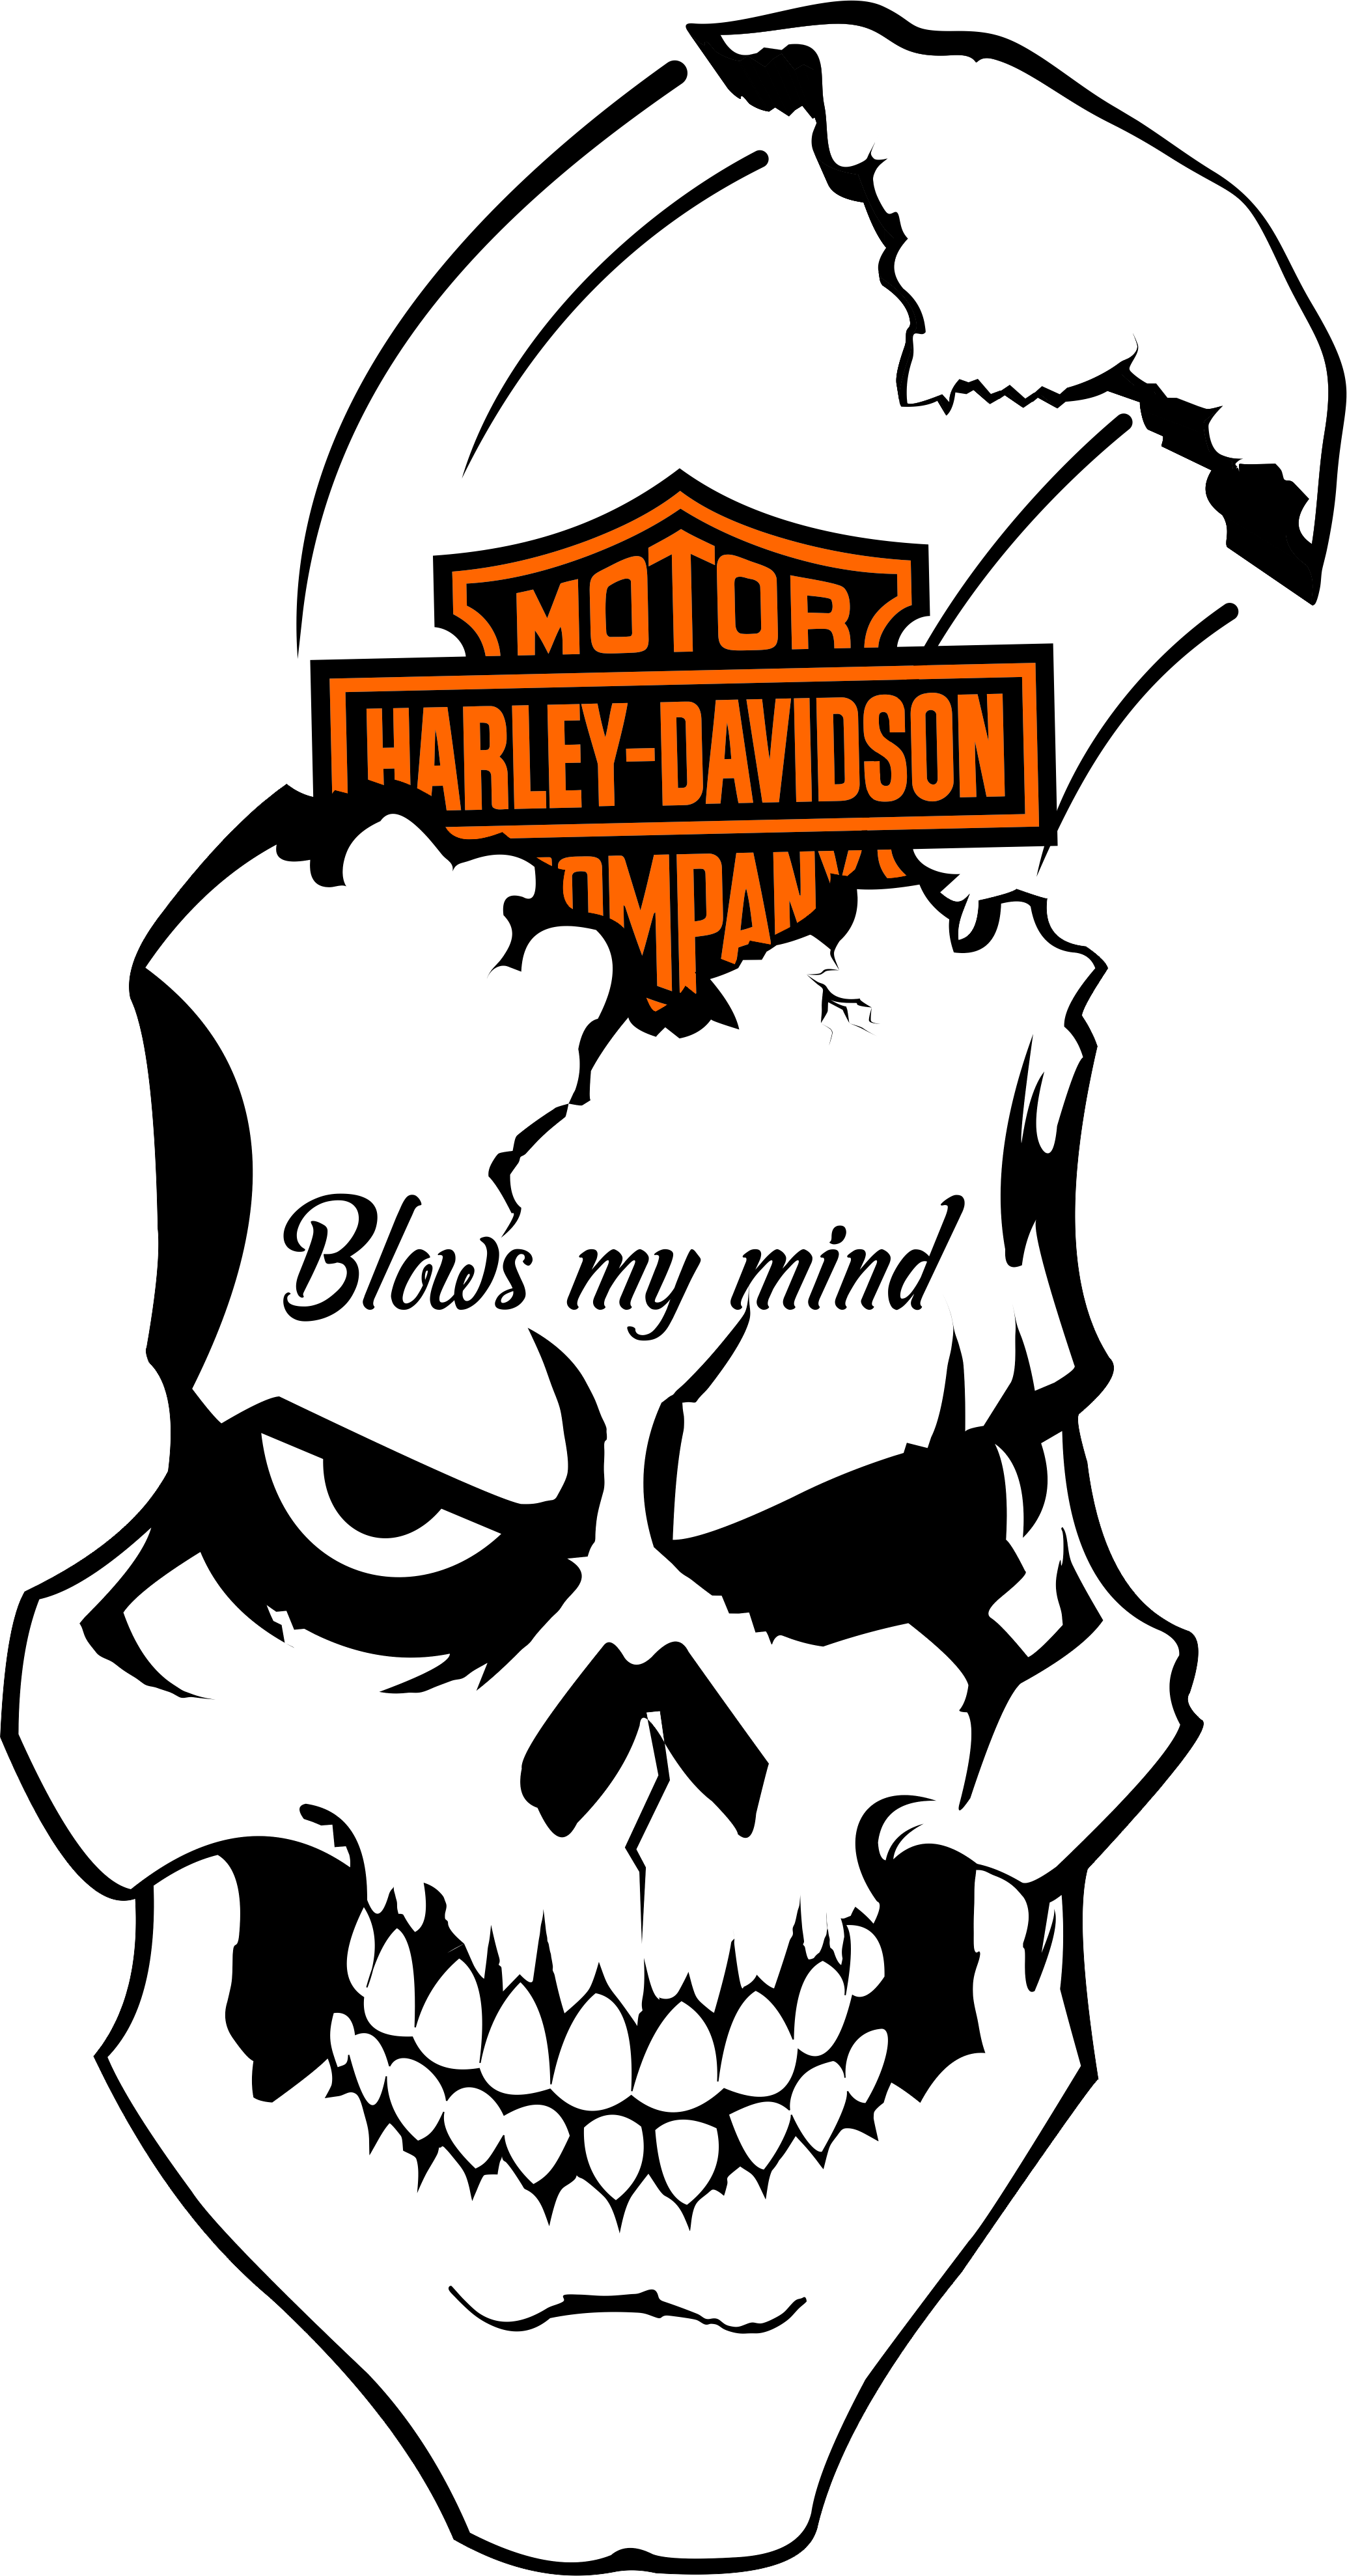 Two Wheels Move The Soul - Harley Davidson (2069x3957)